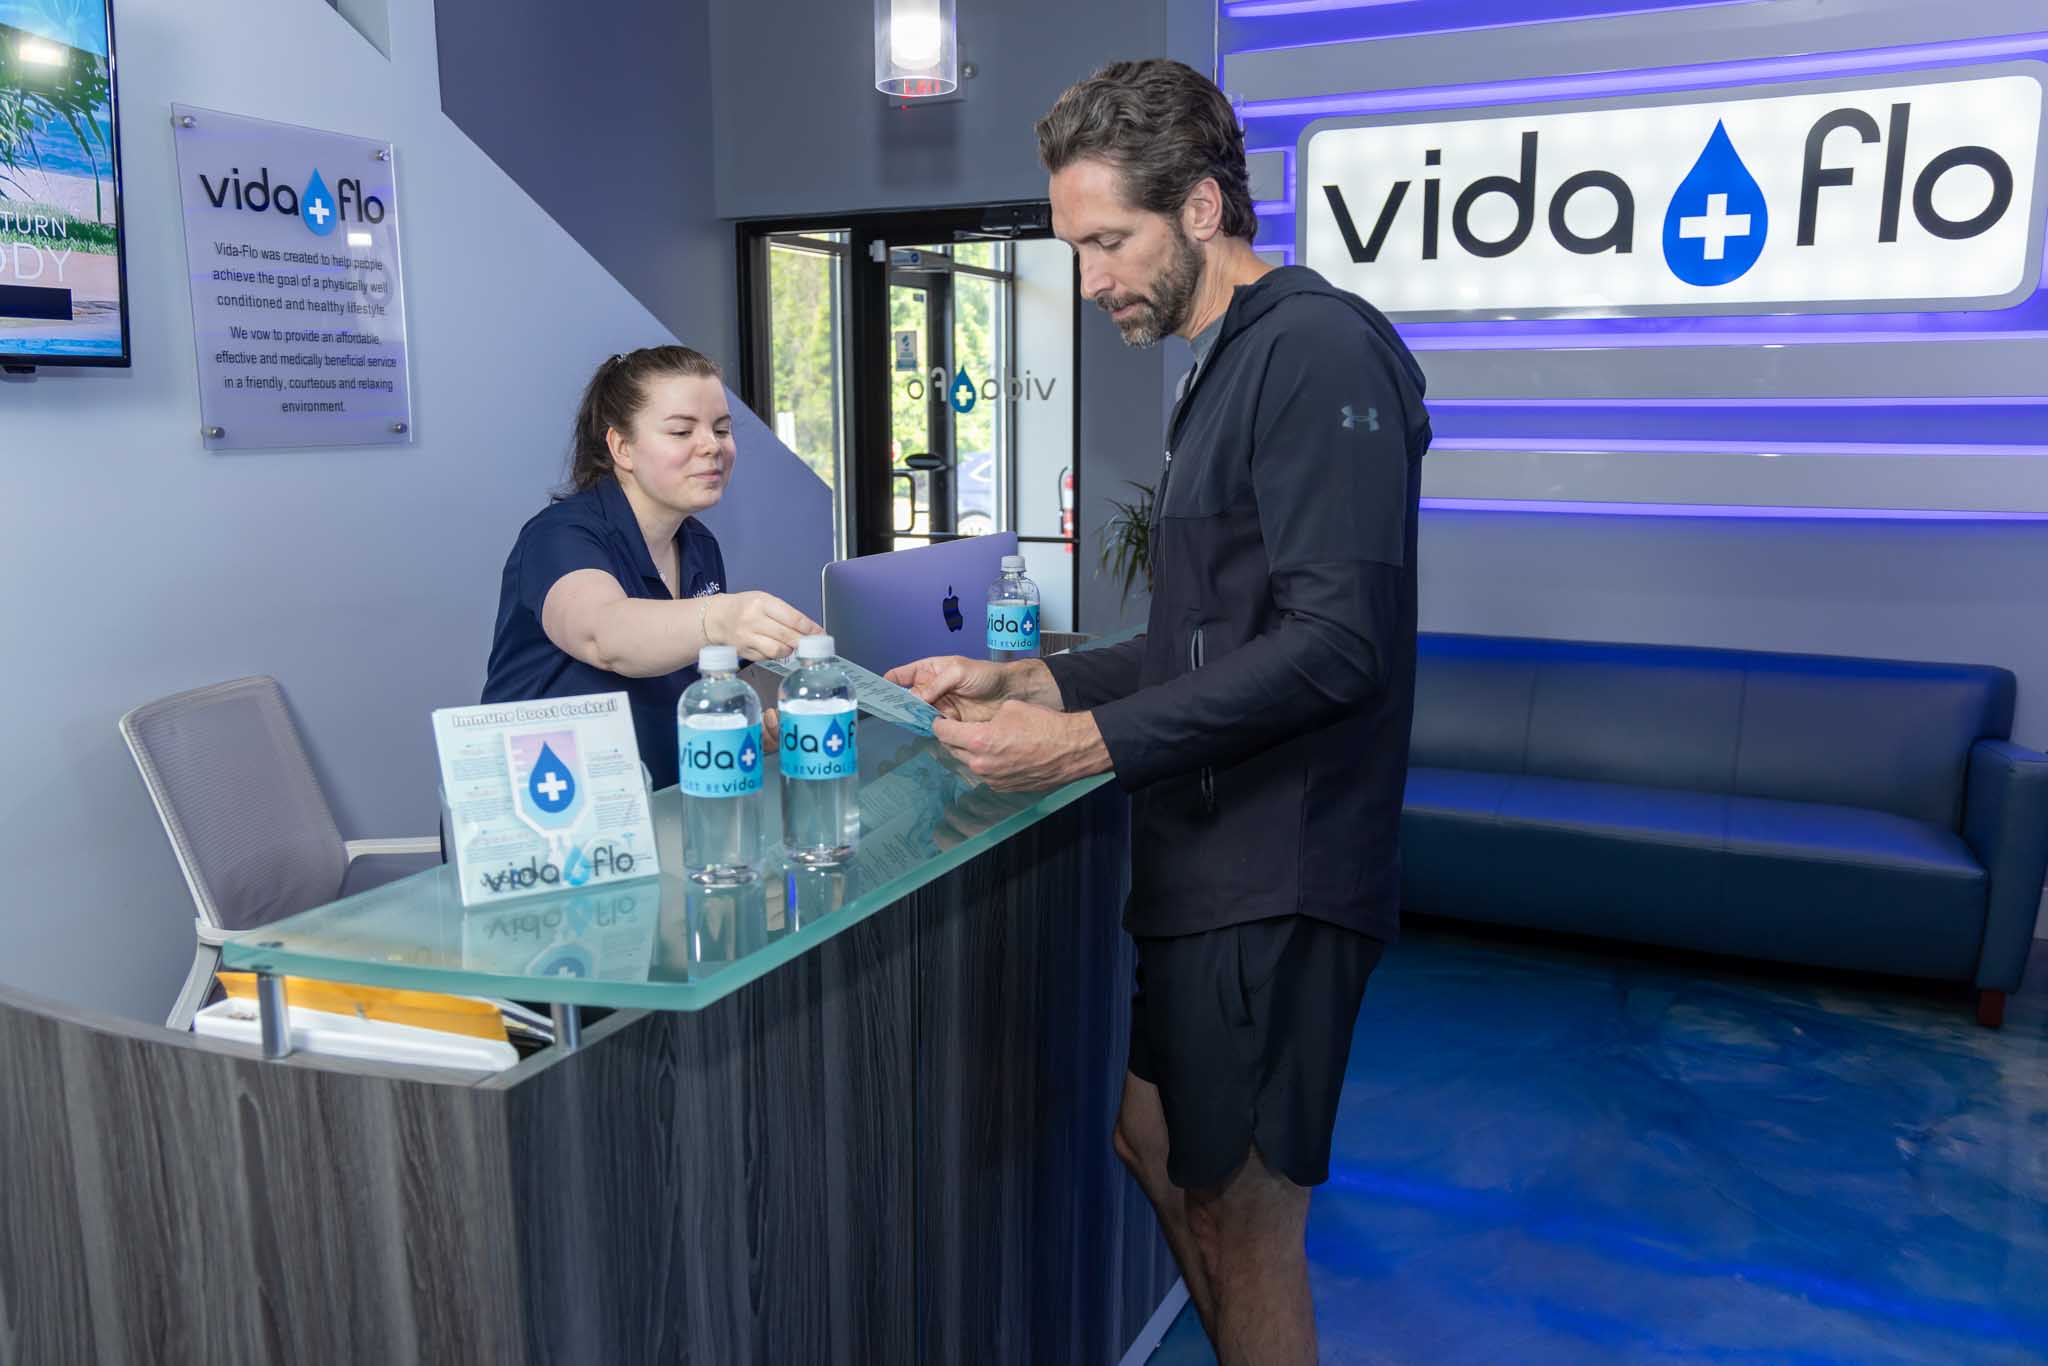 A client going over information with a wellness consultant at Vida-Flo - we offer premier IV hydration treatment for aging in Johns Creek, GA.